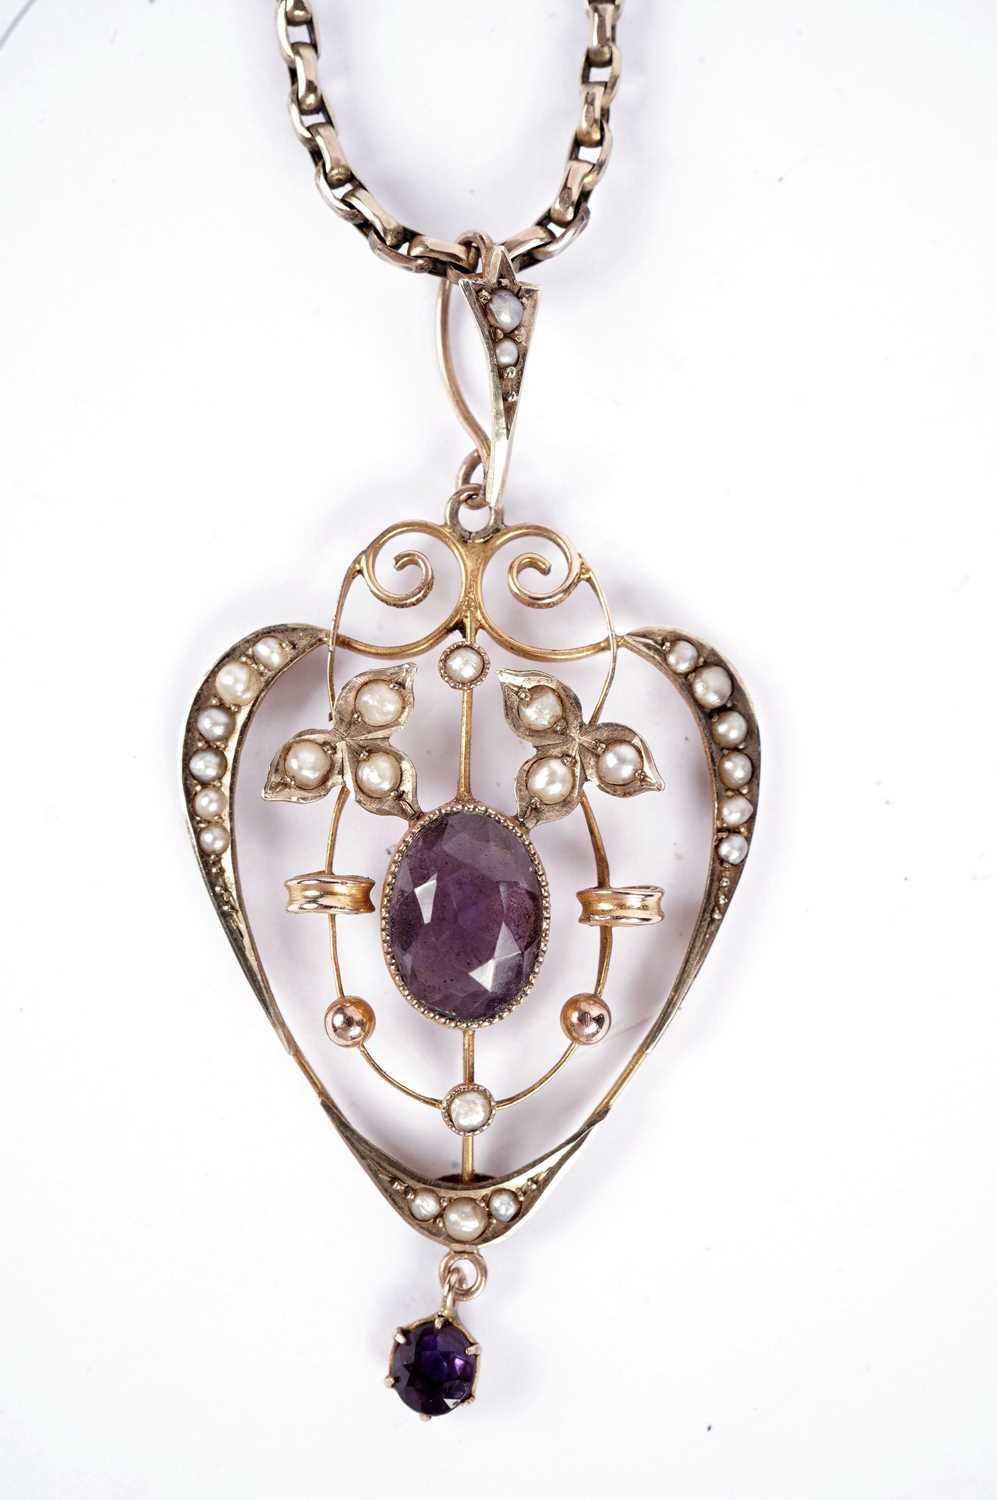 An Edwardian amethyst and seed pearl drop pendant - Image 2 of 4